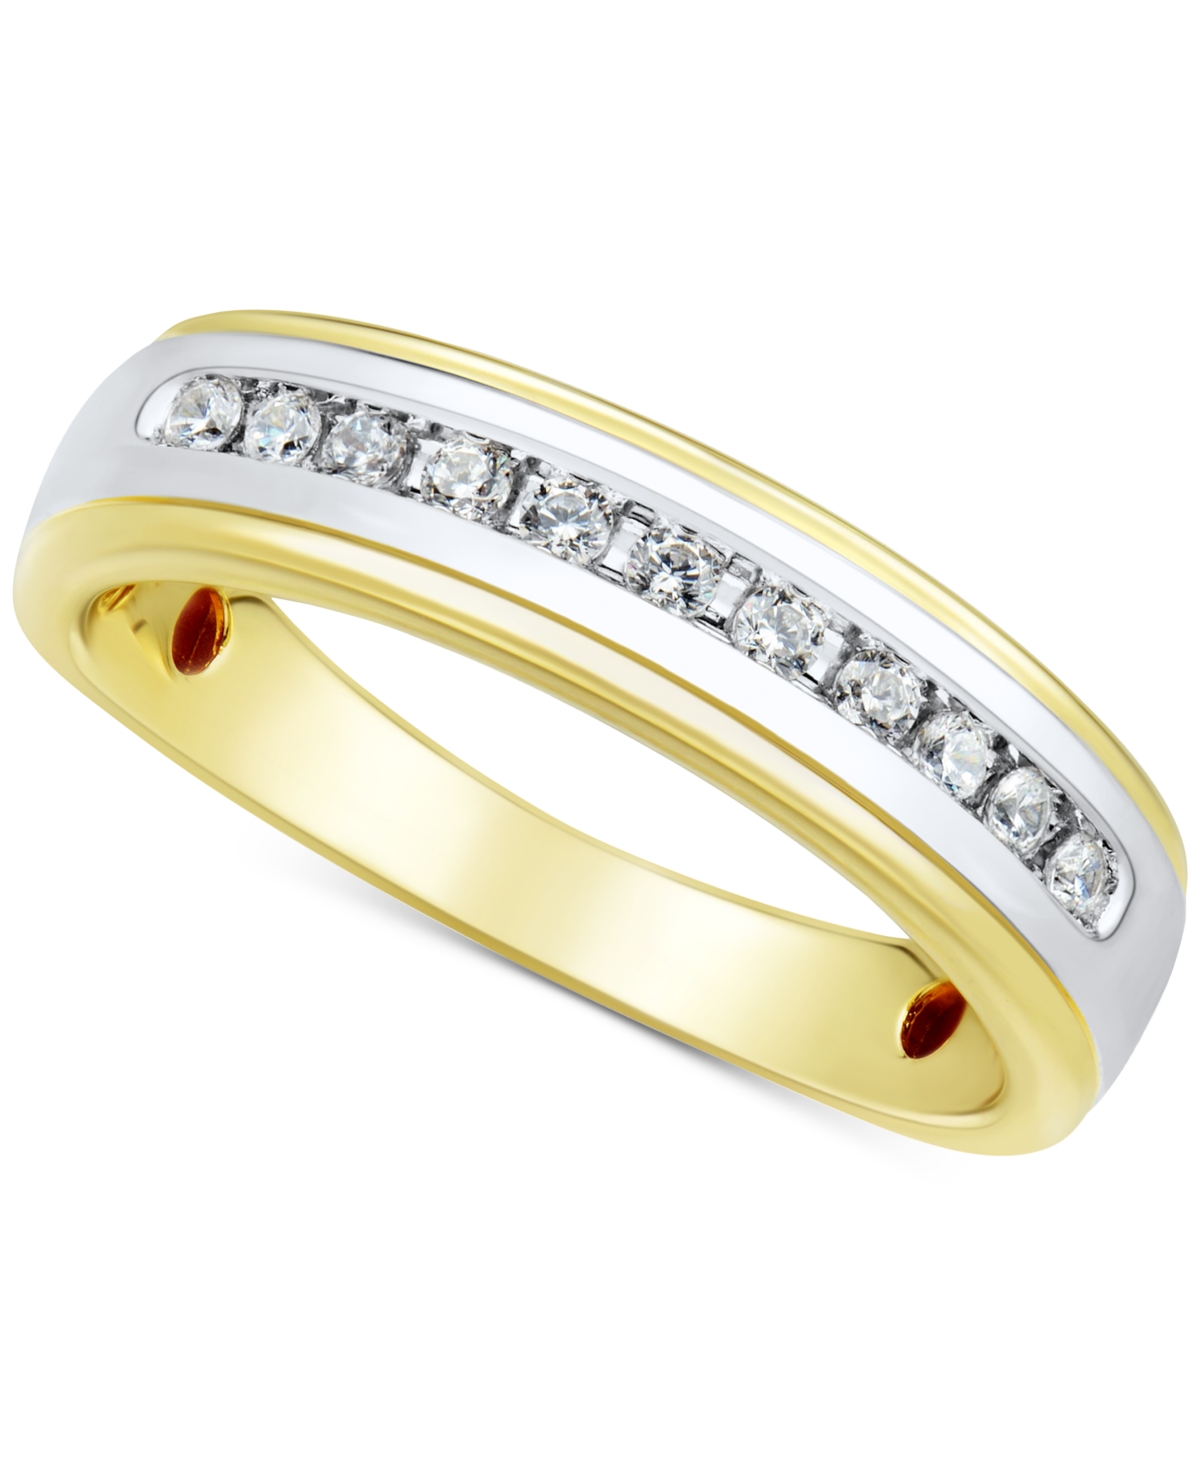 Men's Lab Grown Diamond Band (1/4 ct. t.w.) in 10k Gold - Yellow Gold